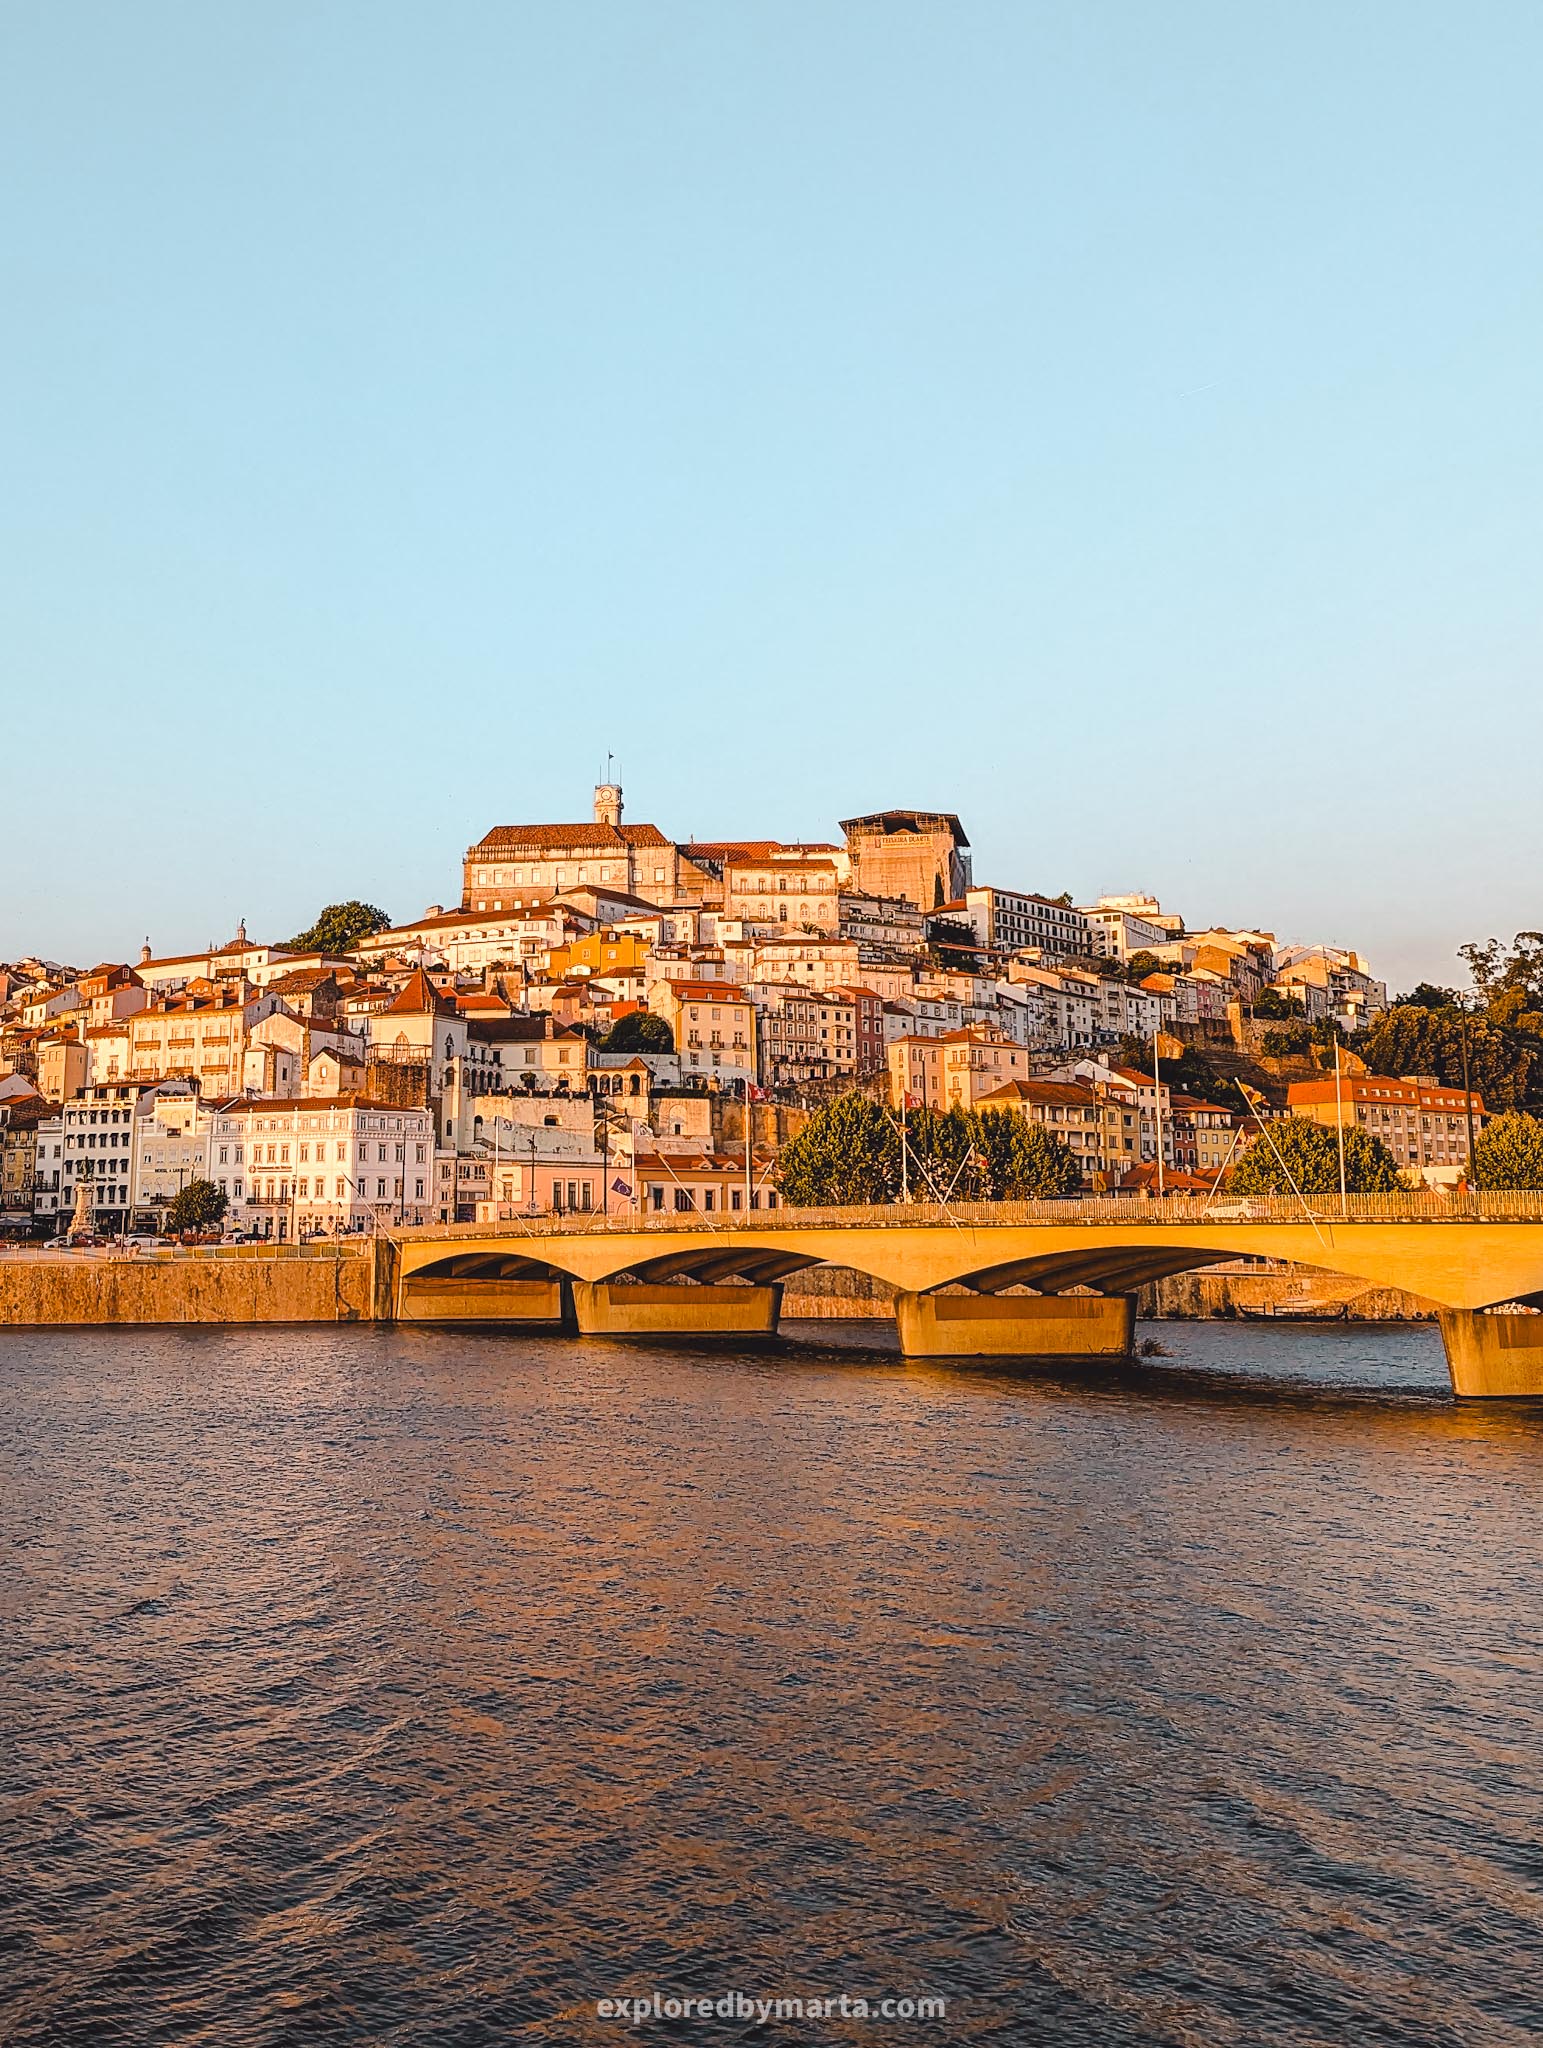 Coimbra, Portugal - the old capital of Portuguese country